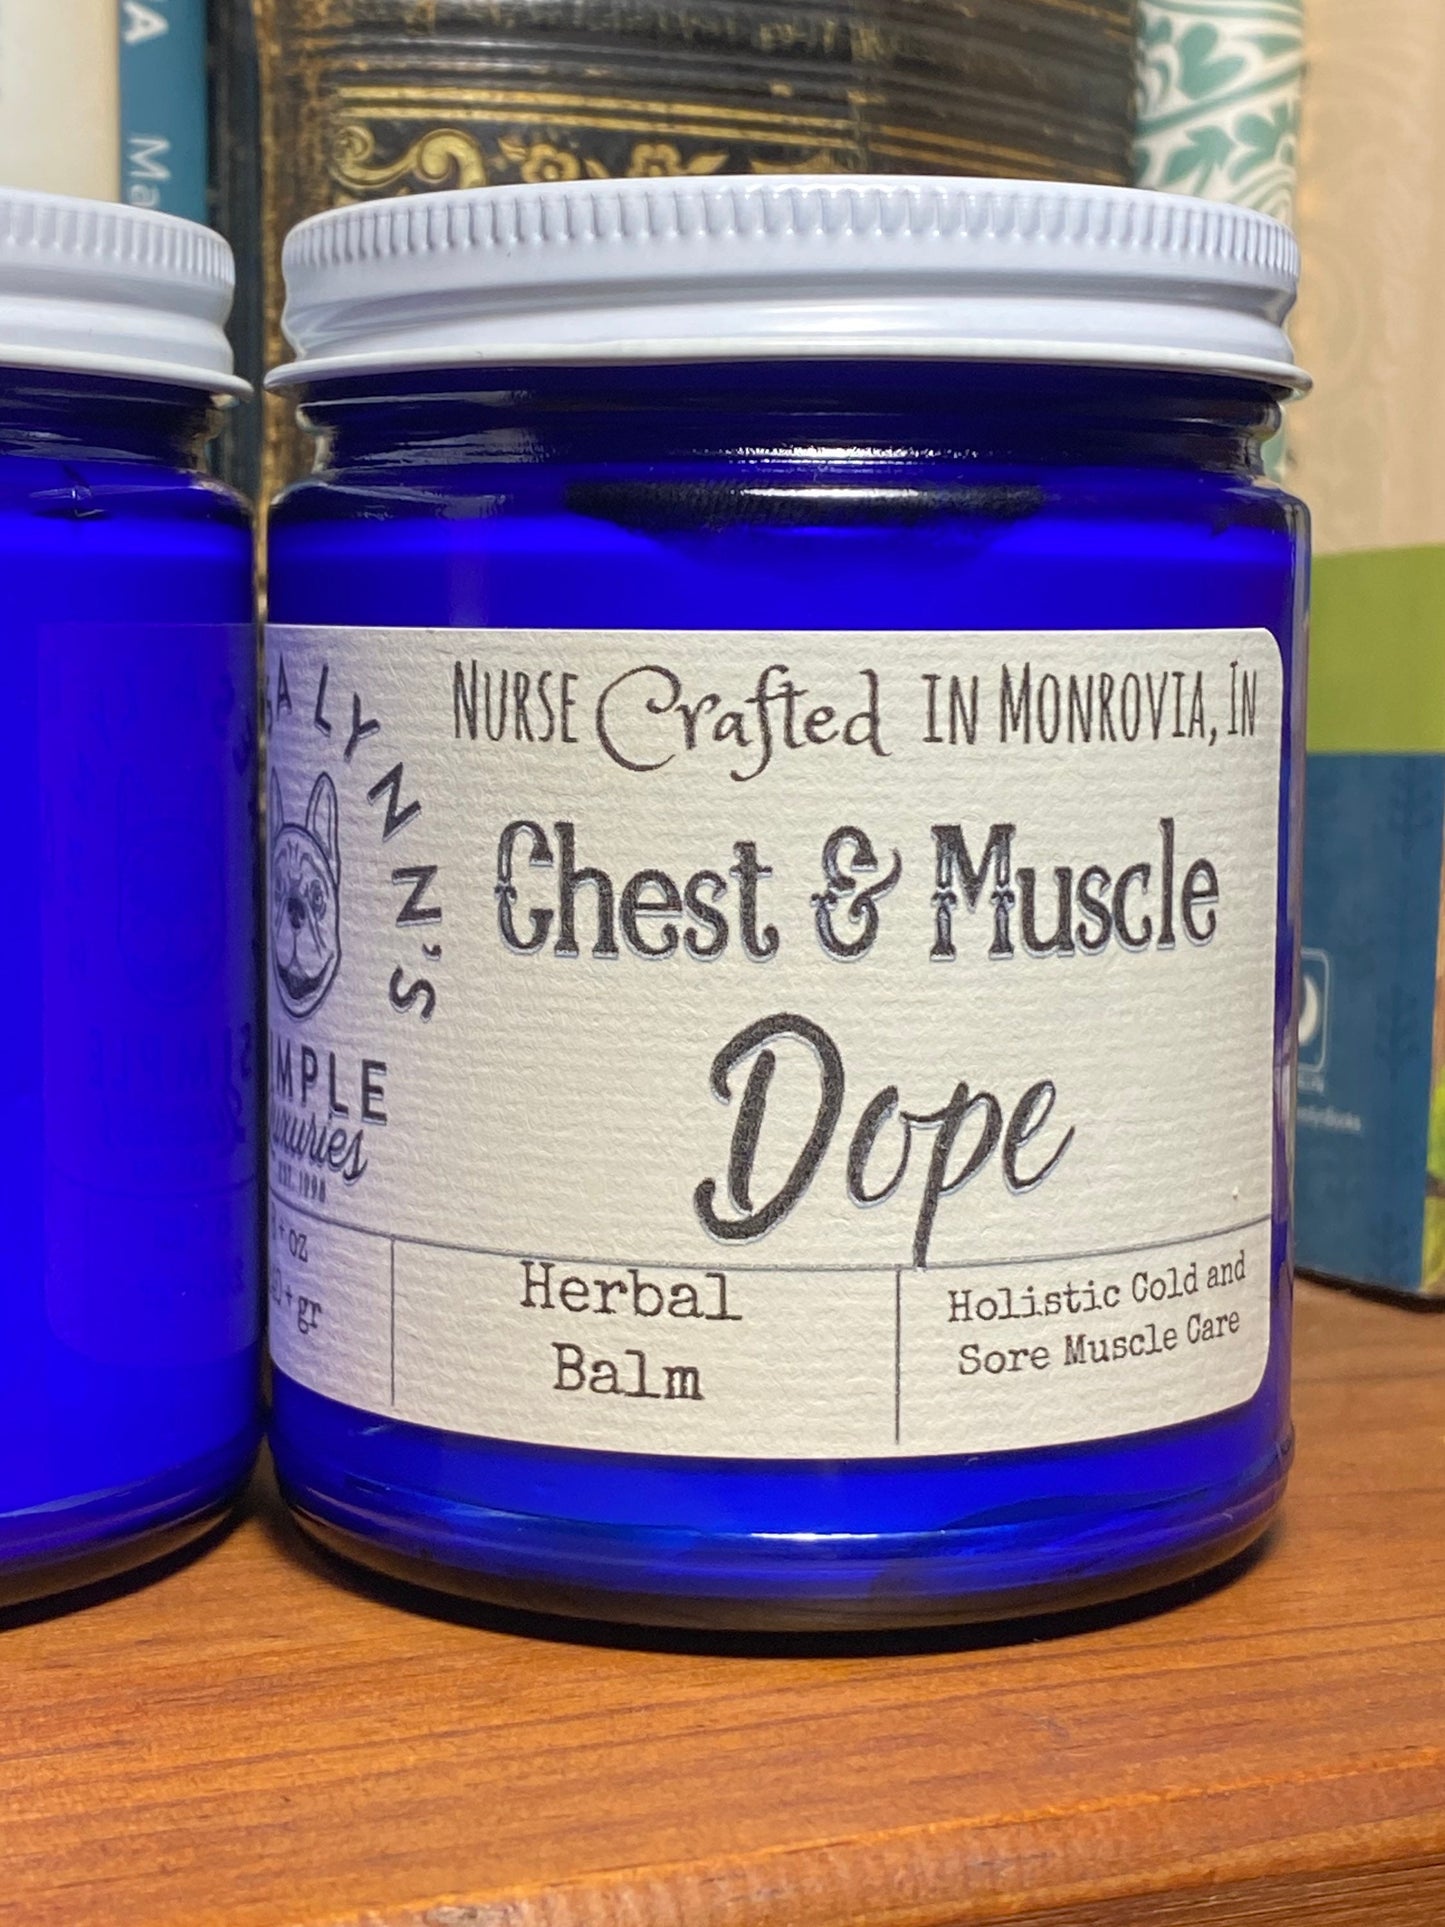 Chest and Muscle Dope, herbal support cream